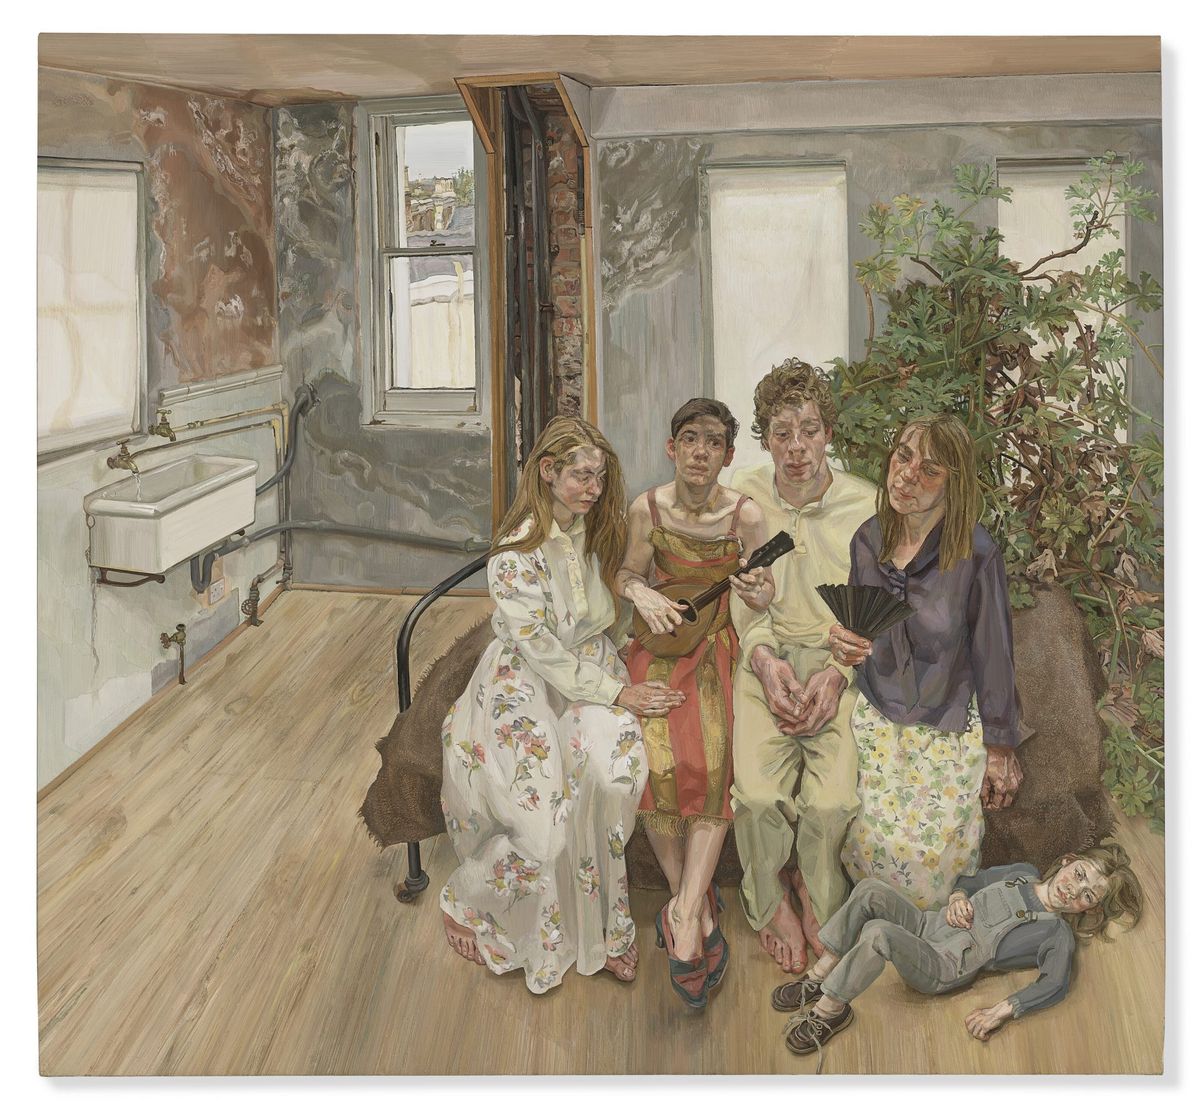 7.	Lucian Freud: Large Interior, W11 (after Watteau), 1981–83. Forrás: Christie’s